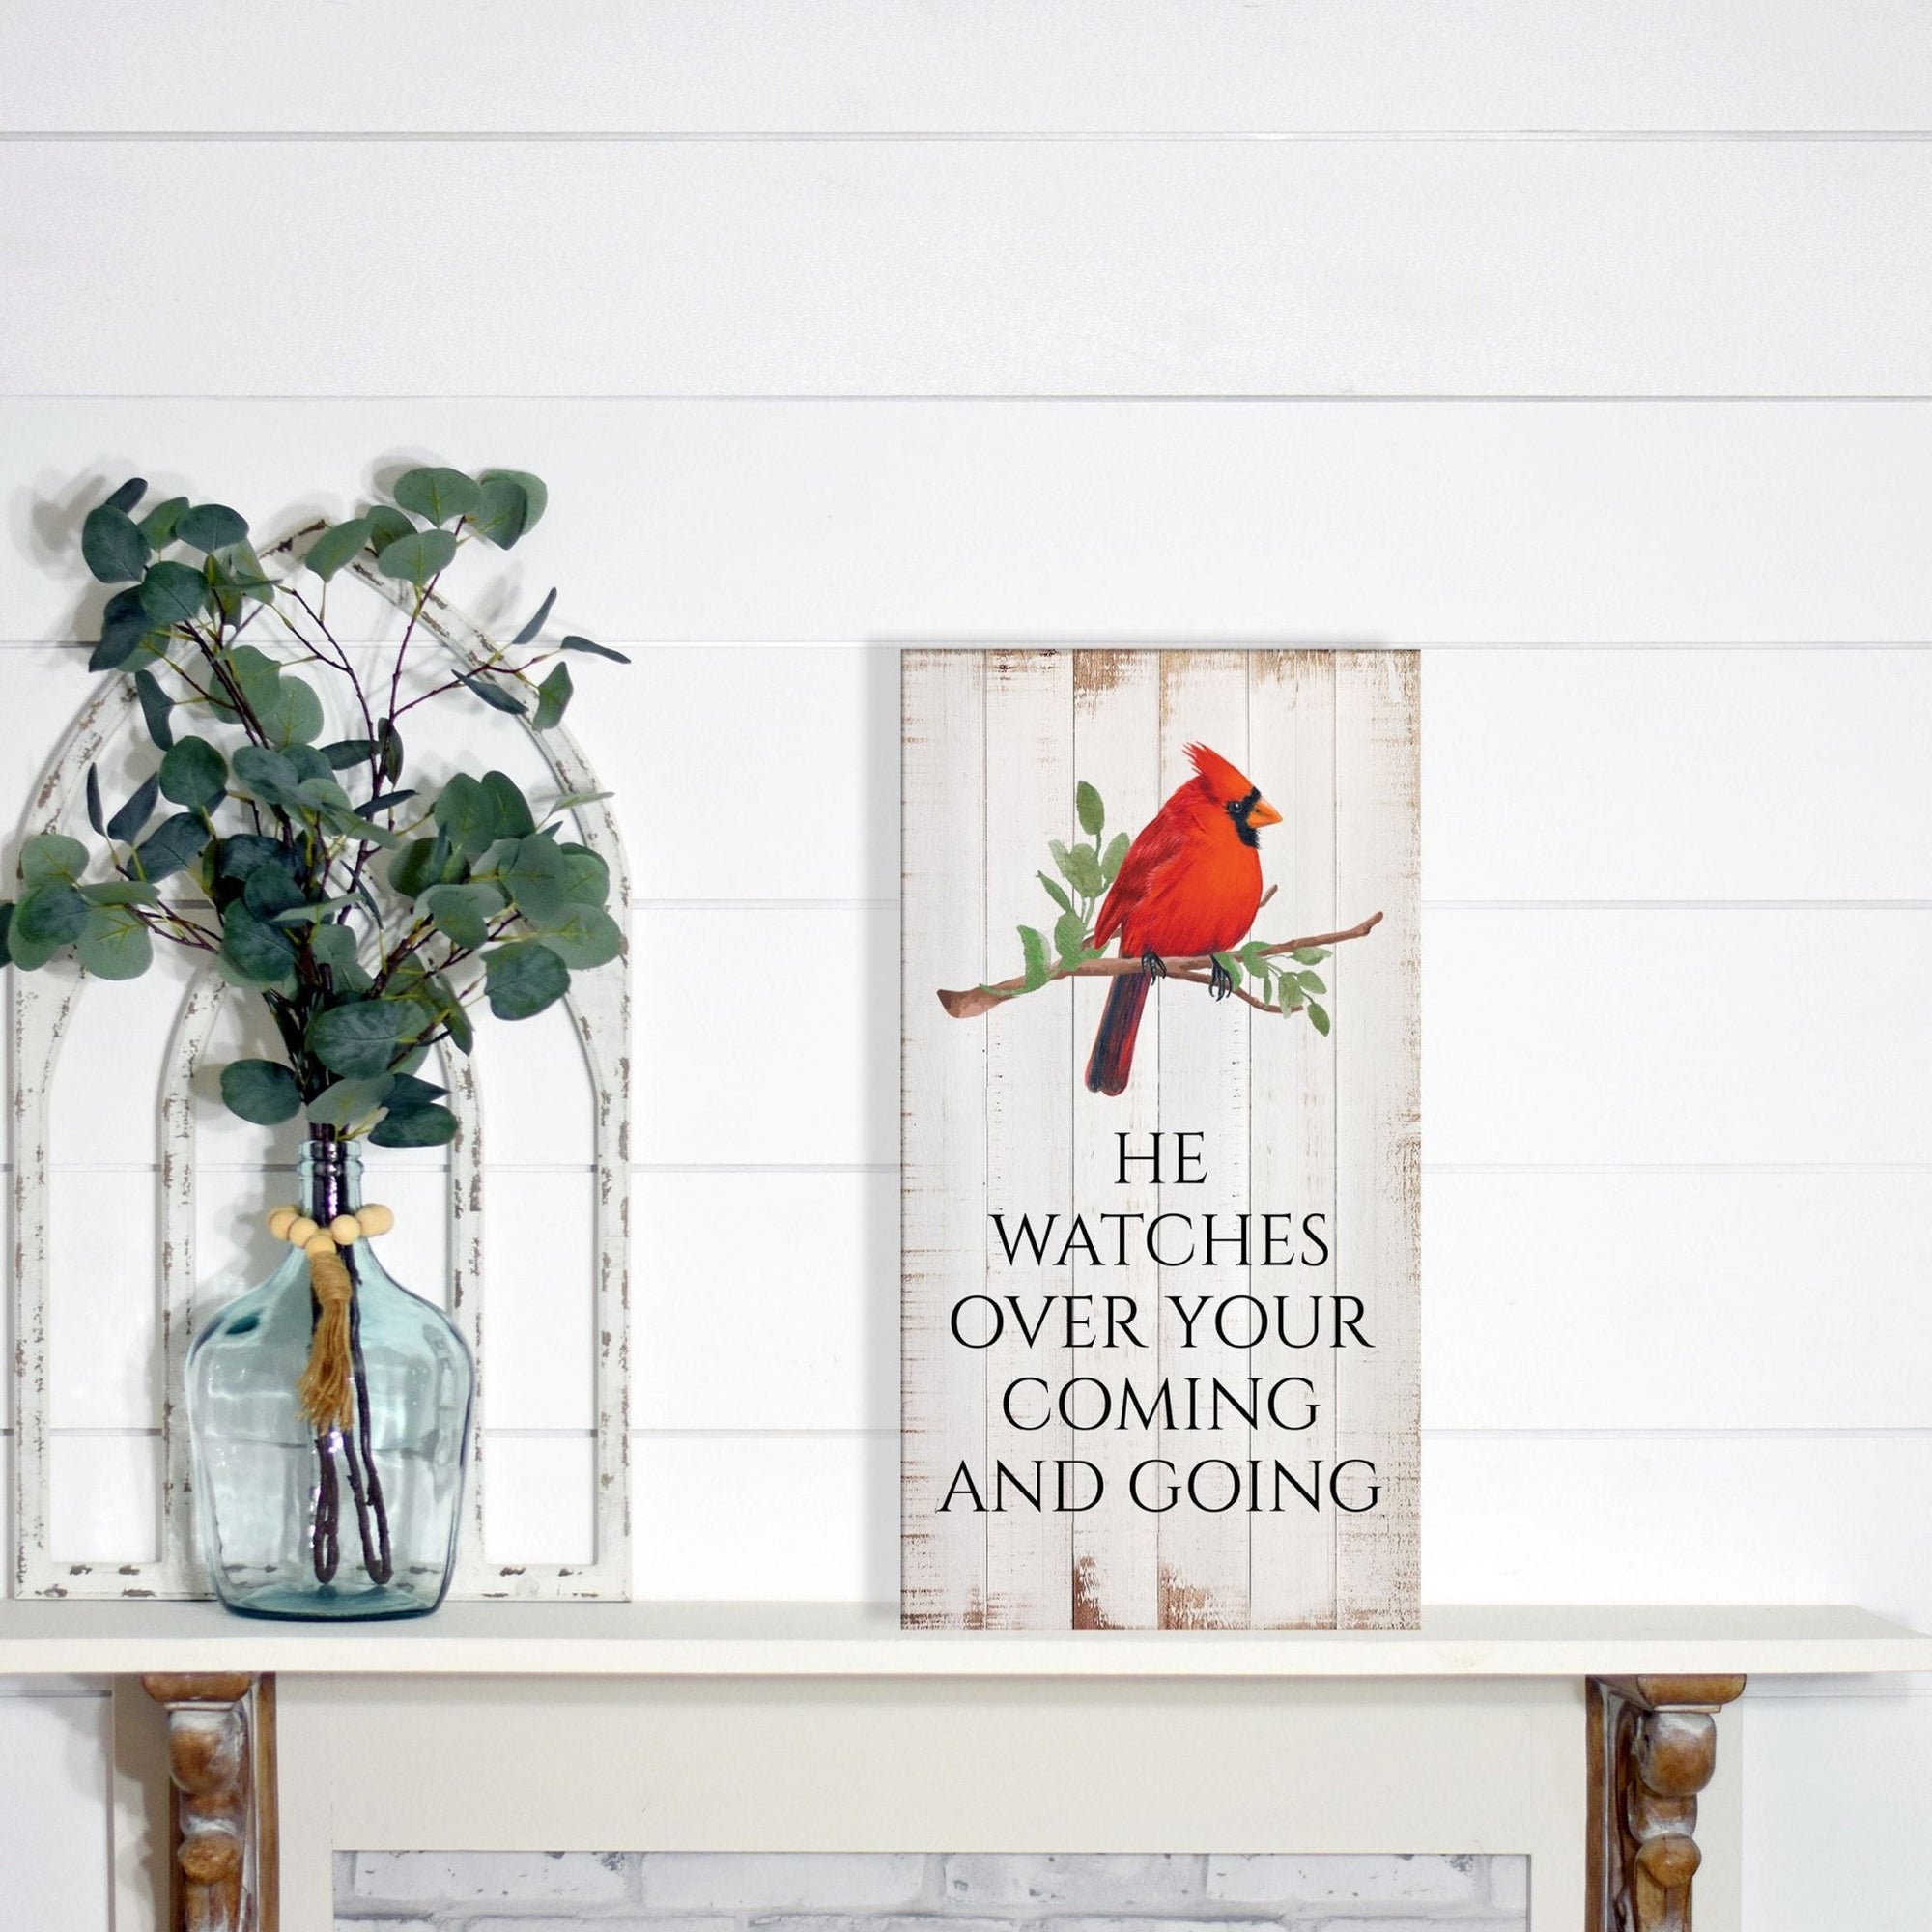 Wooden wall decor with a heartfelt message - Ideal home decor gift